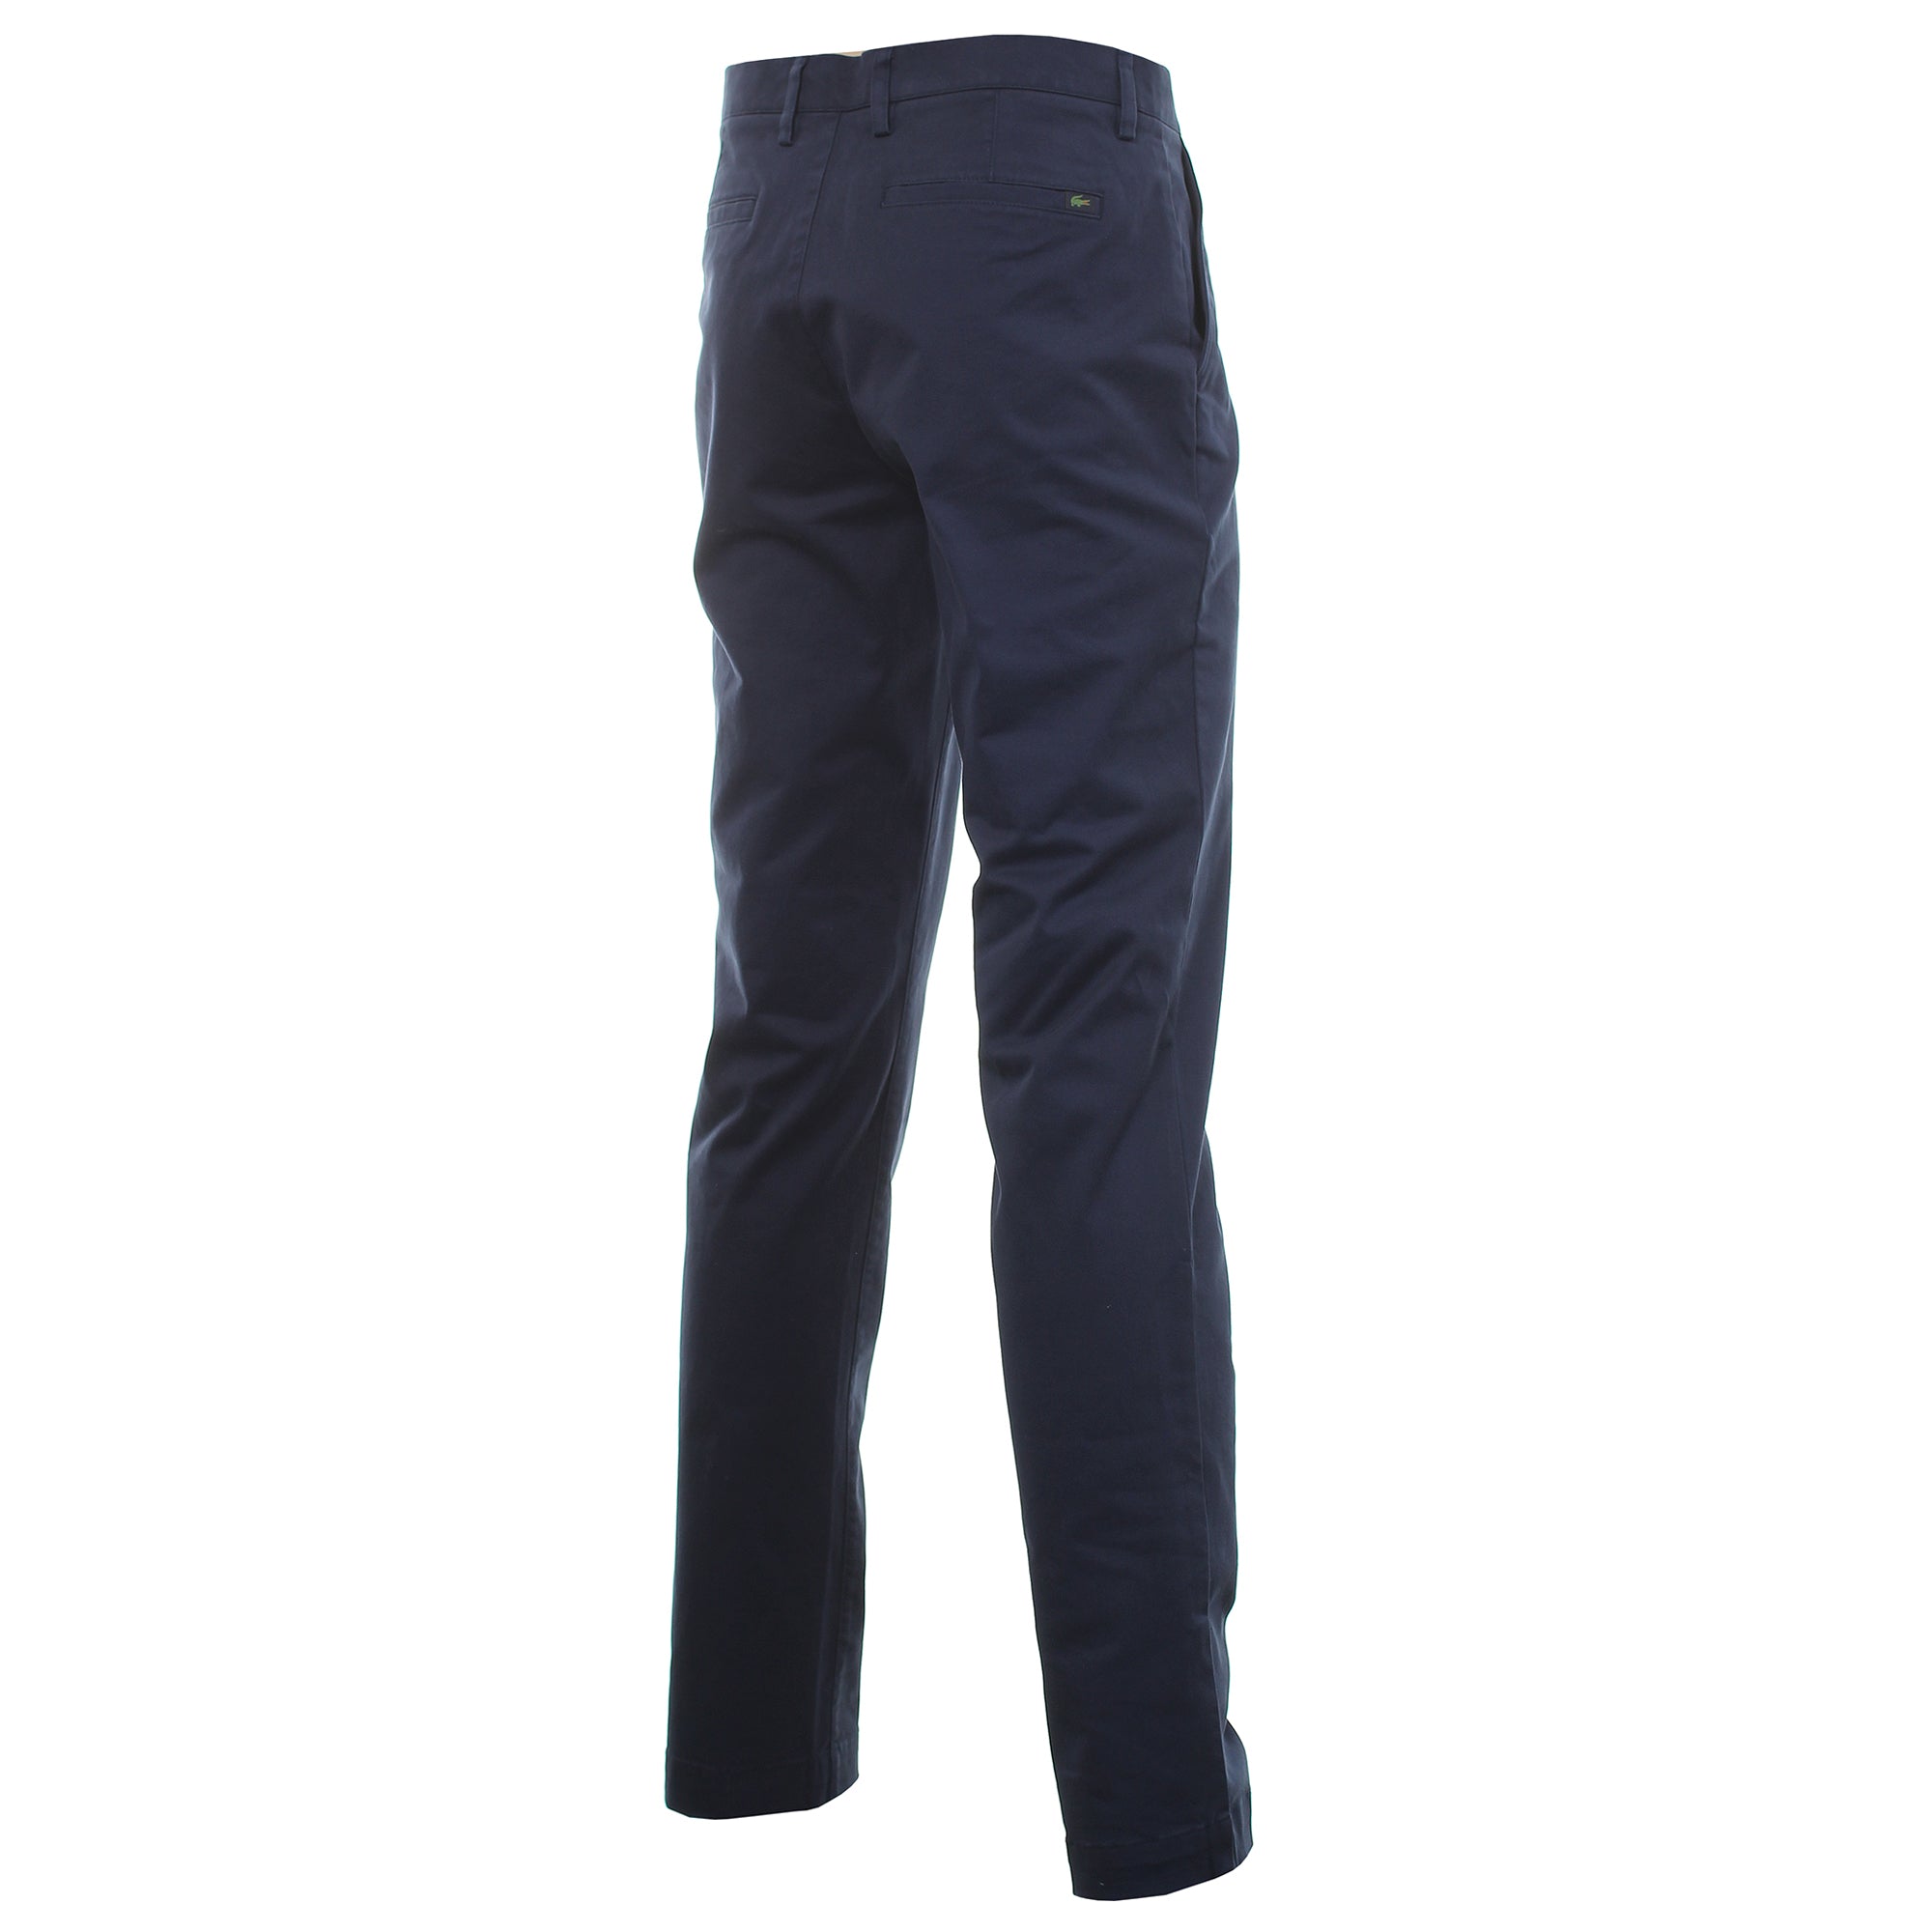 lacoste-stretch-chino-pant-hh9553-cw-navy